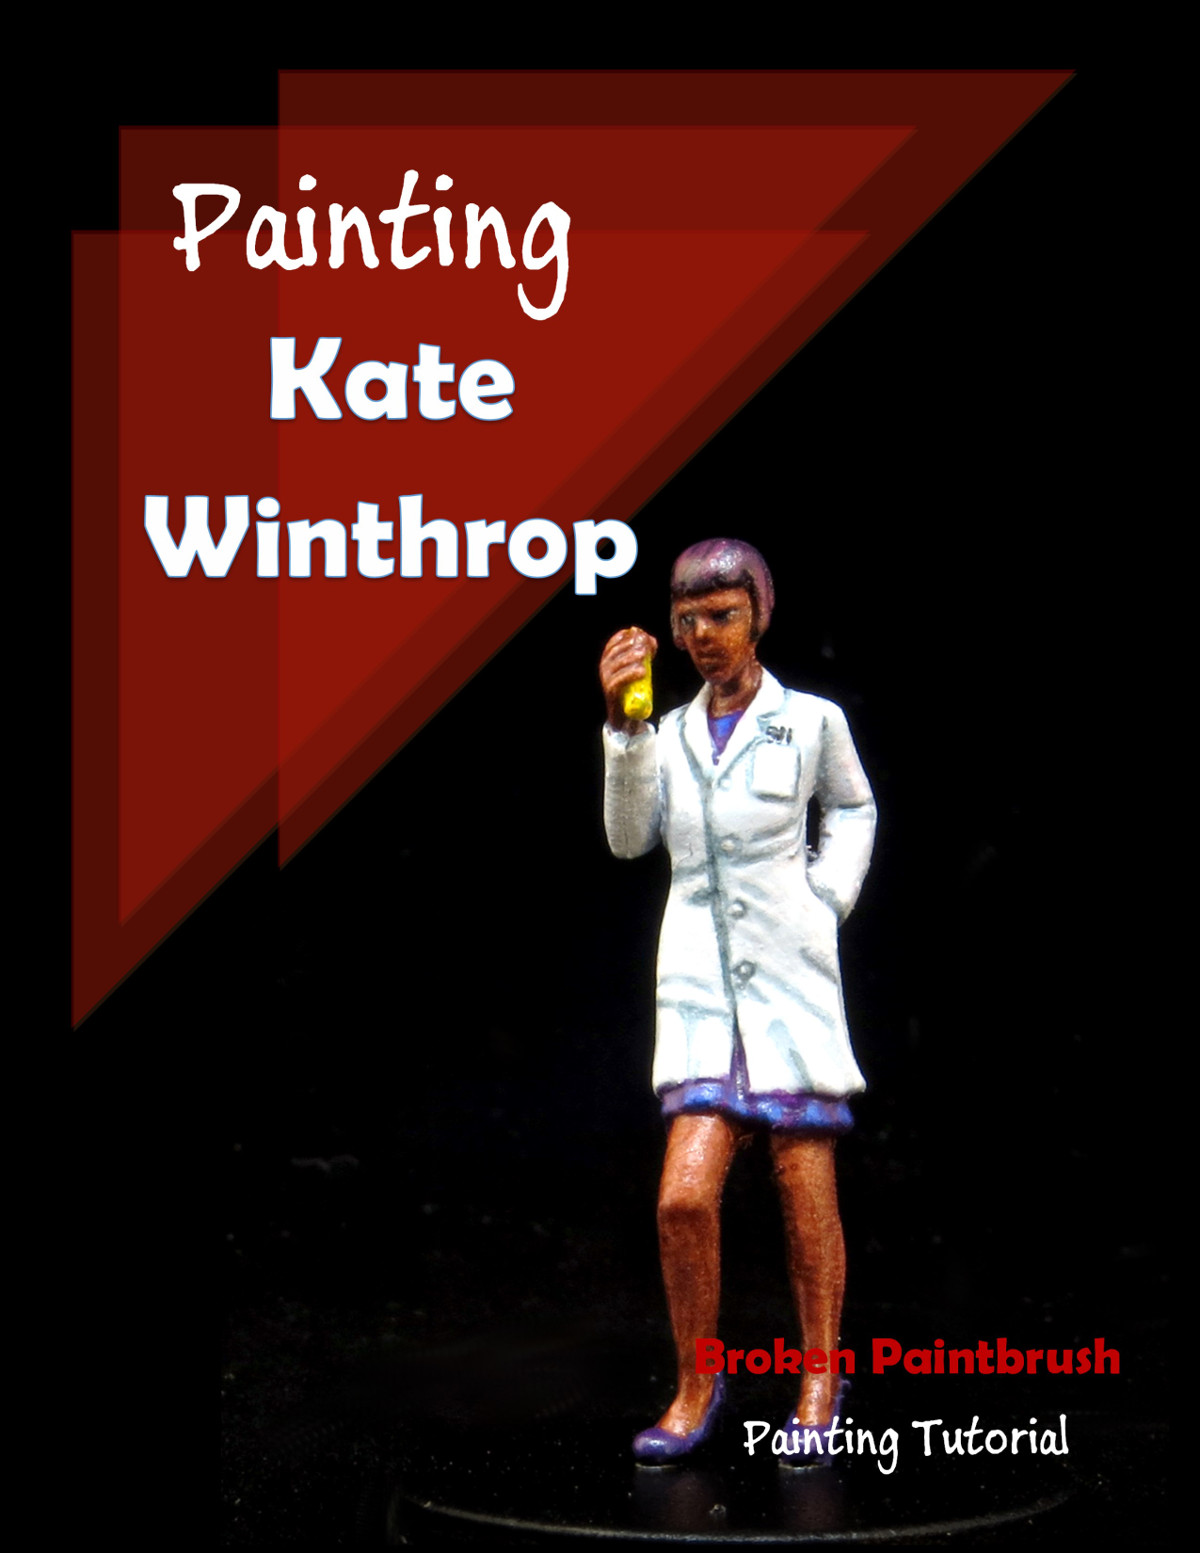 Painting Guide Kate Winthrop